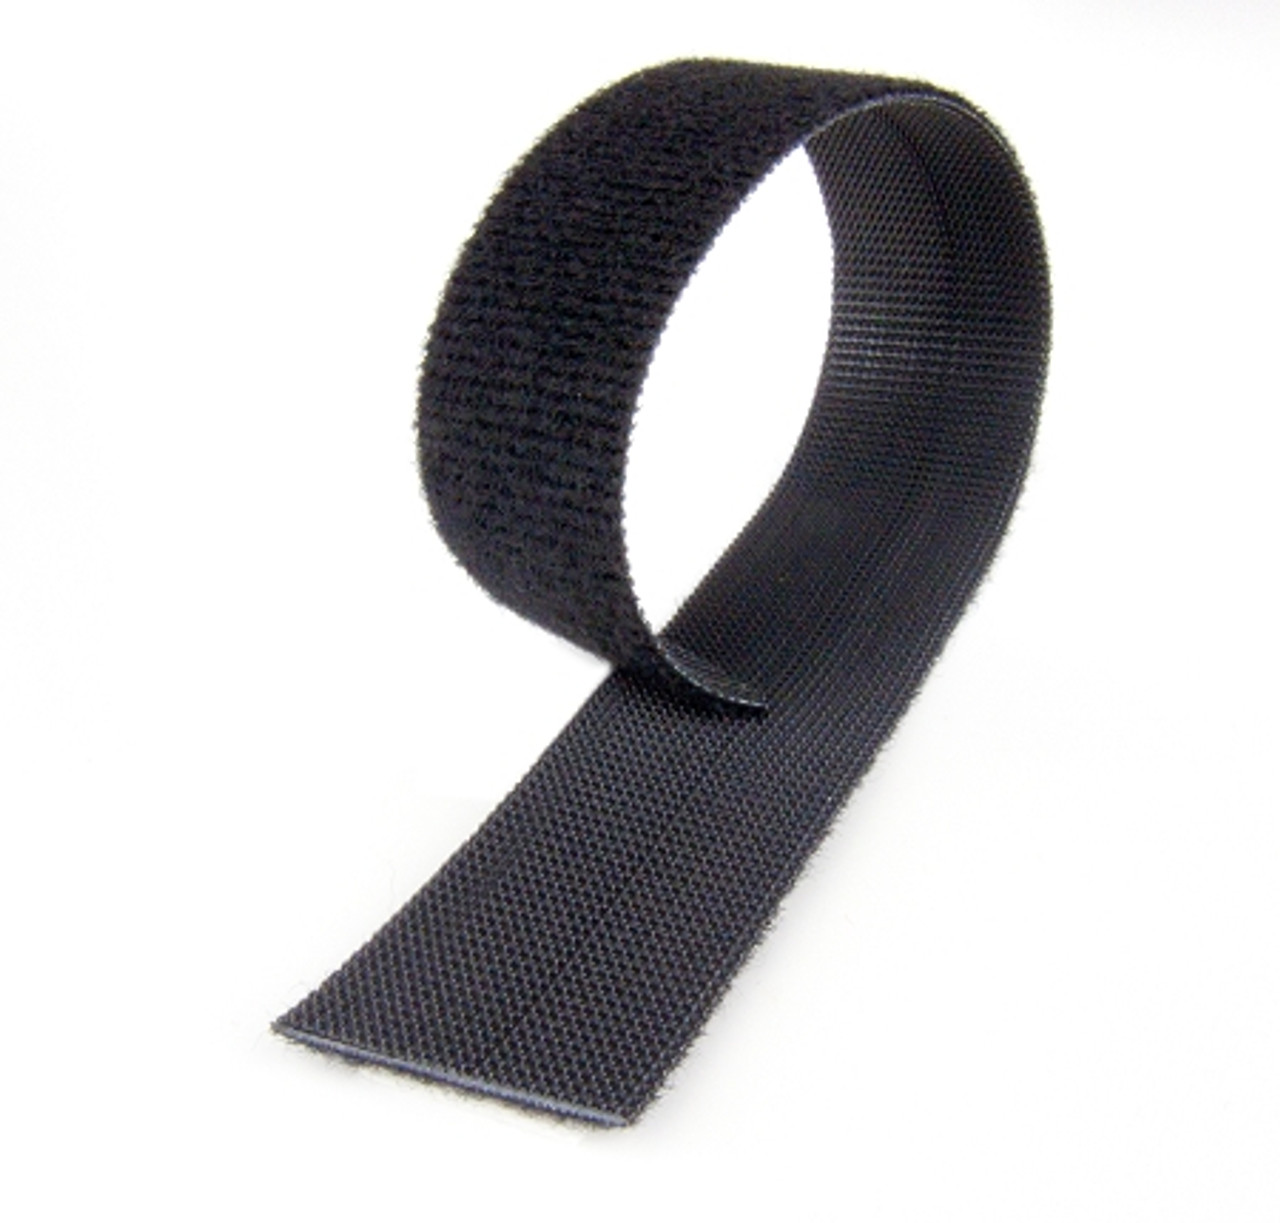 Cable Management Accessory, VELCRO Brand ONE-WRAP Cable Tie, .5 x